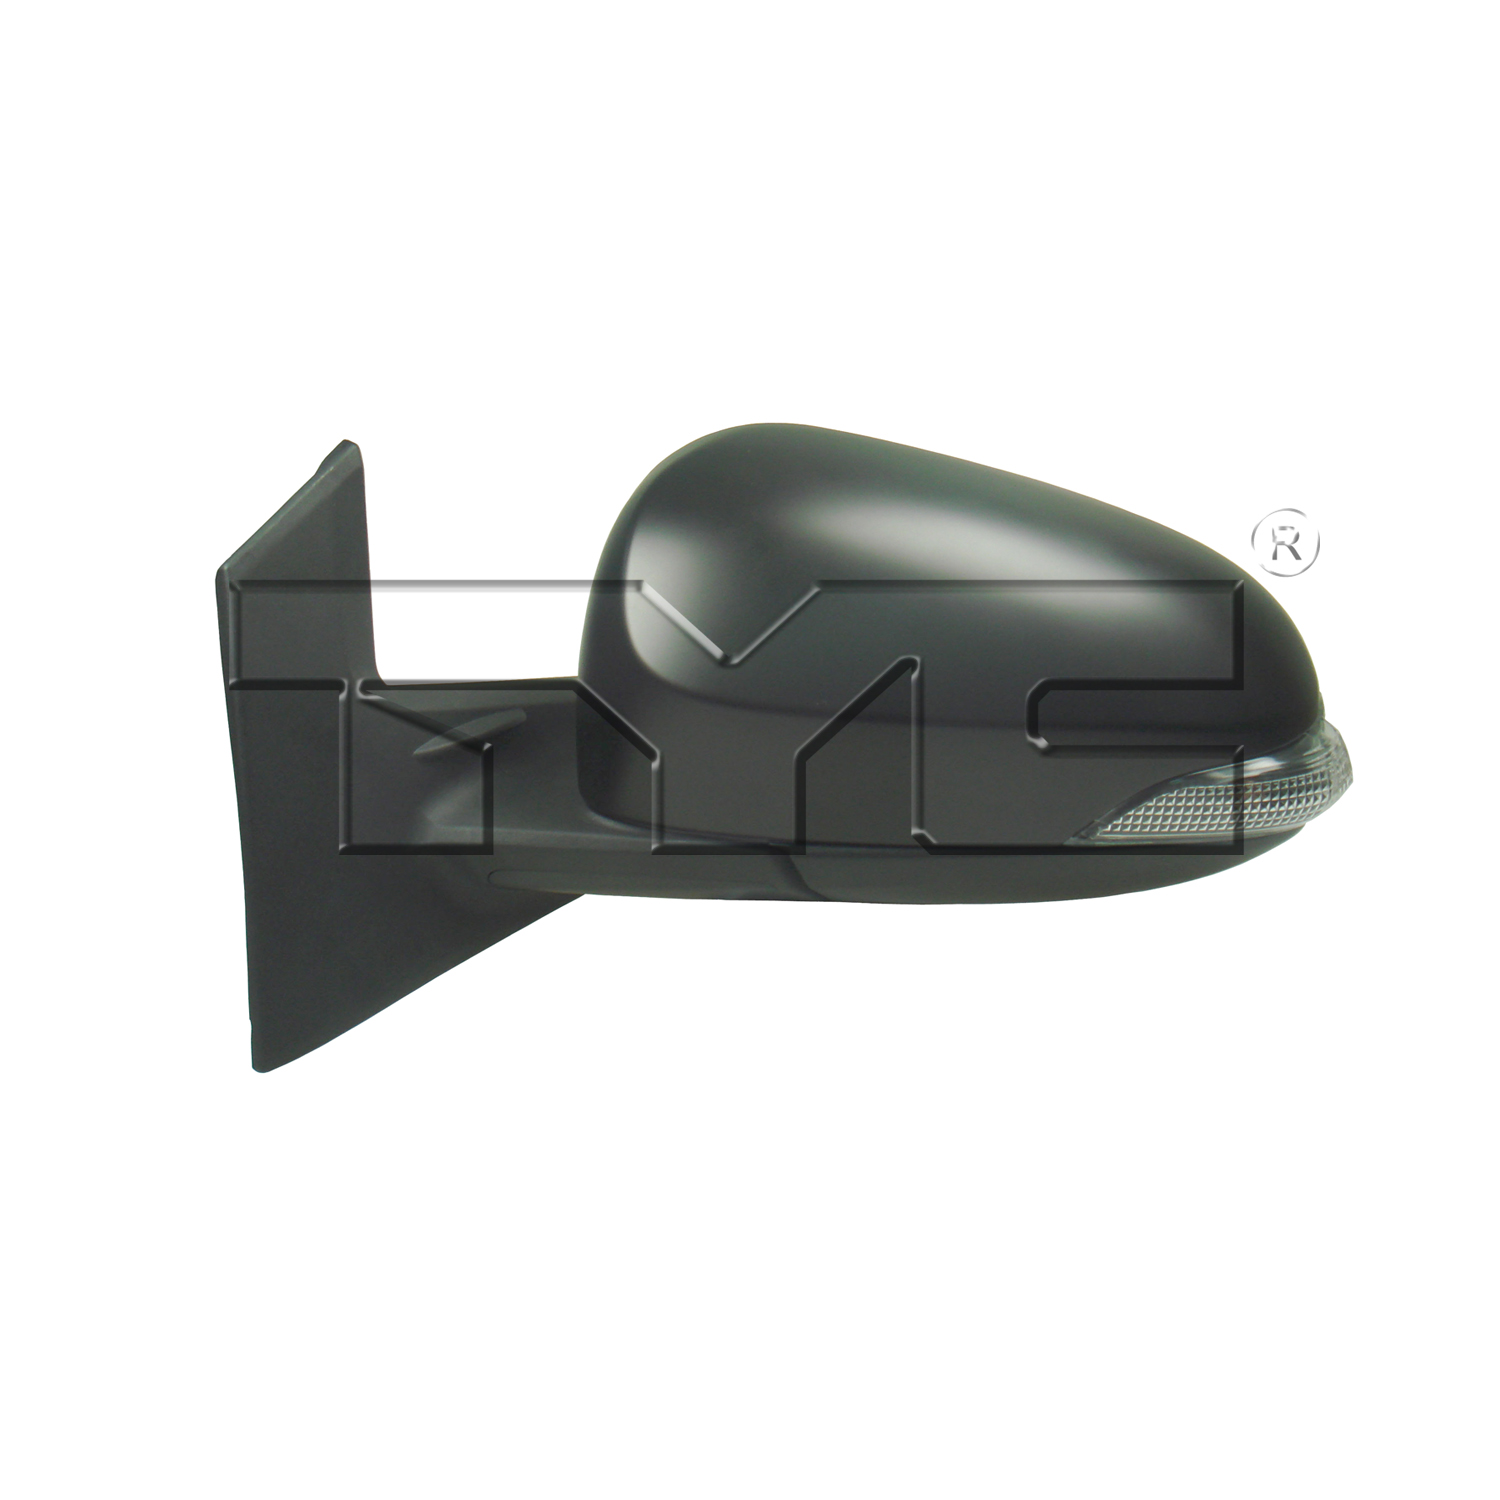 Aftermarket MIRRORS for TOYOTA - PRIUS C, PRIUS c,12-19,LT Mirror outside rear view